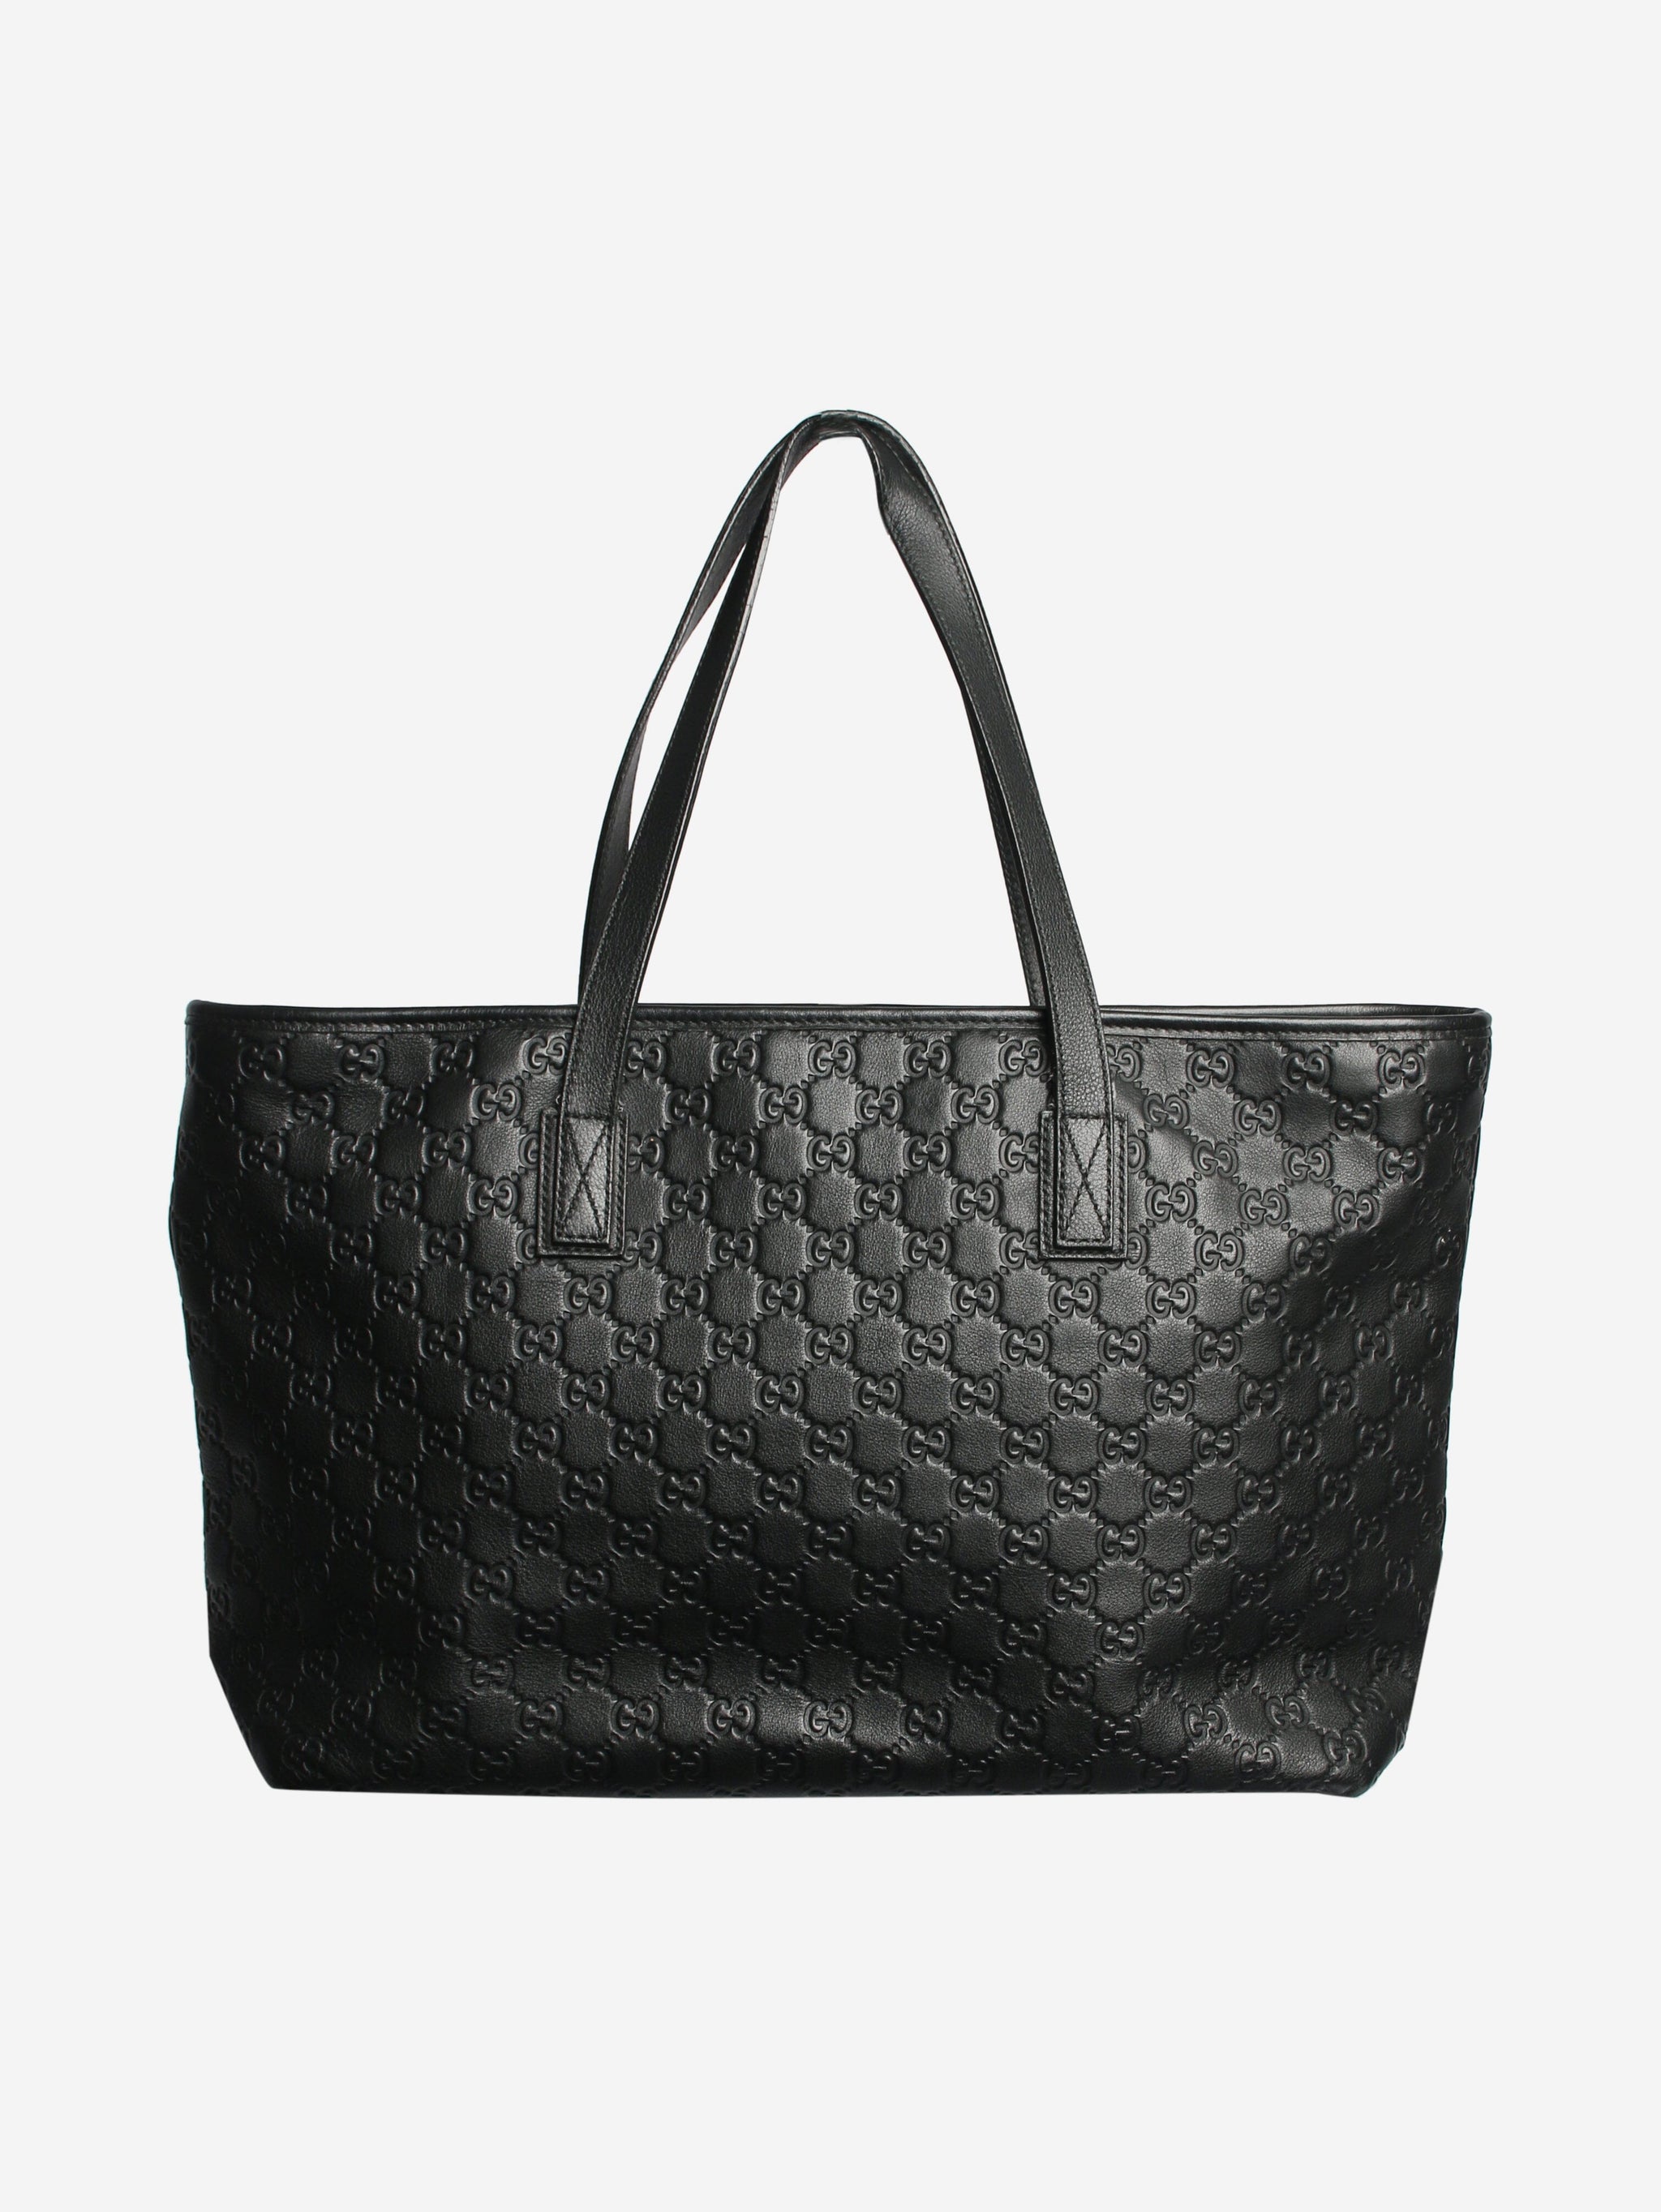 Gucci pre-owned black Guccissima leather tote bag | Sign of the Times